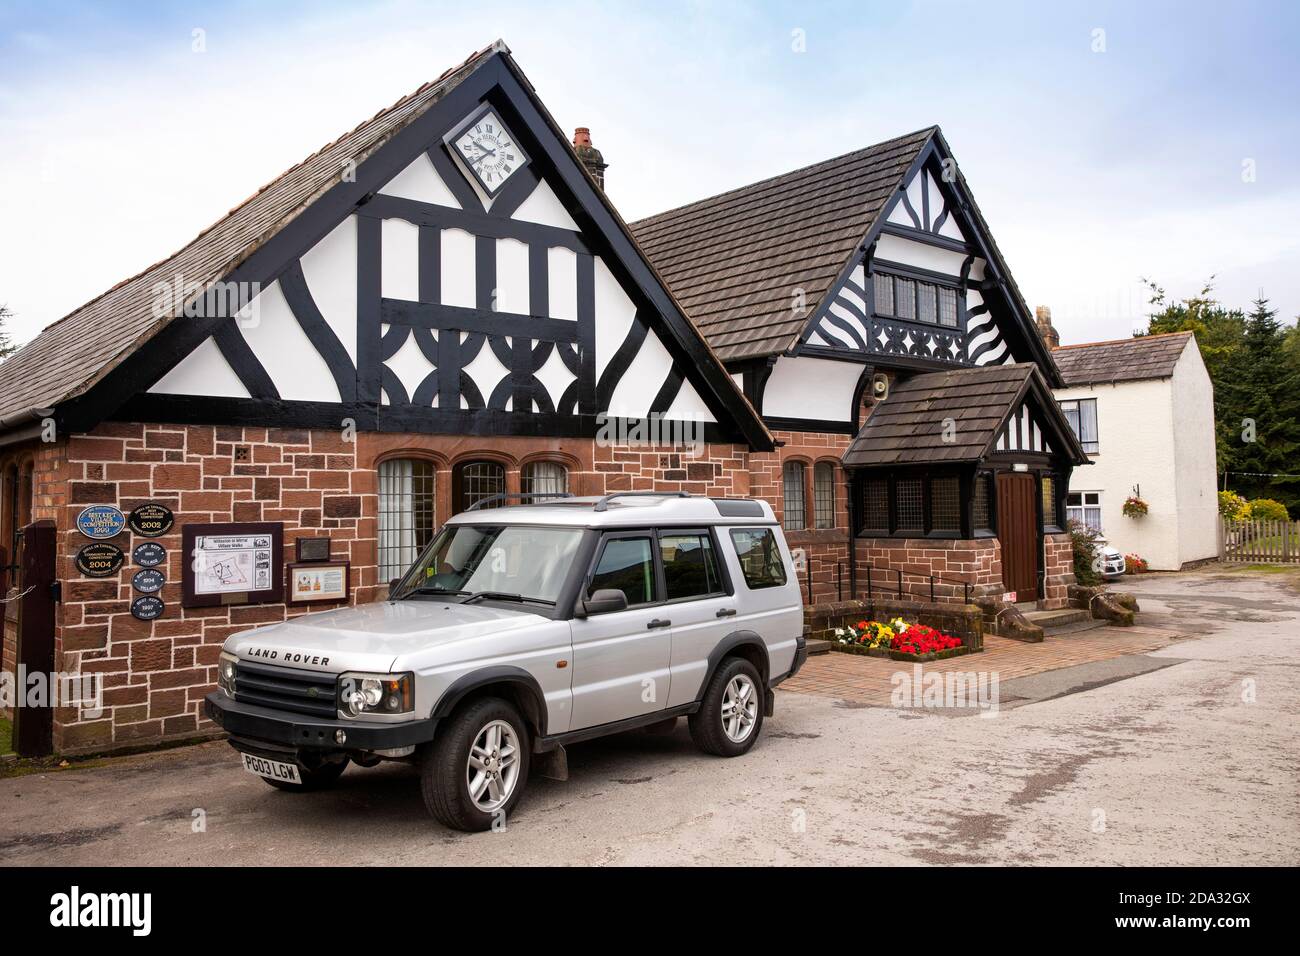 UK, England, Cheshire, Willaston, Green, Village Hall with Range Rover parked outside Stock Photo